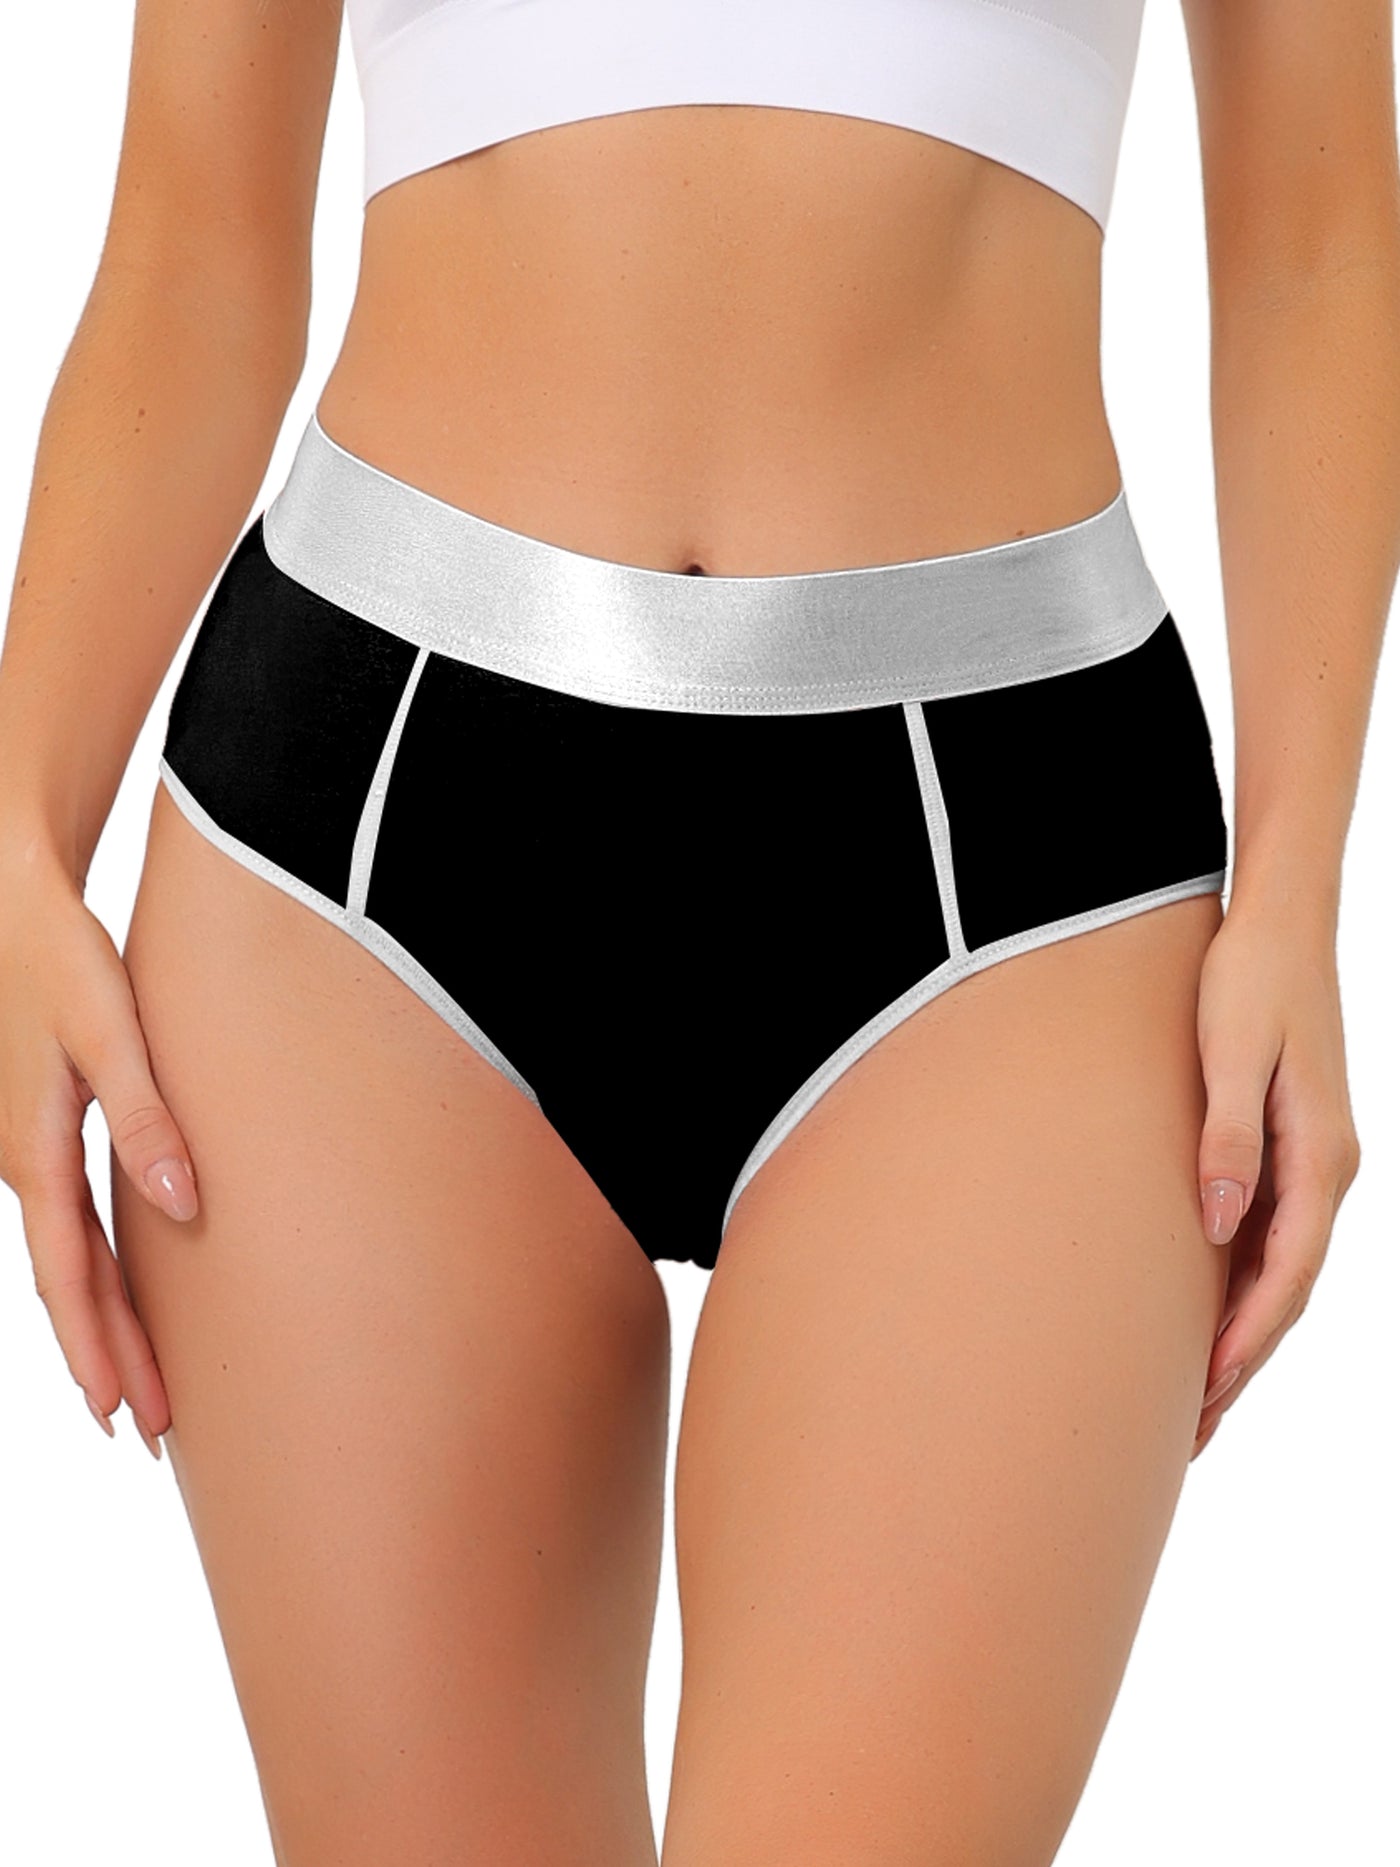 Allegra K Panties for Women (Available in Plus Size), High Waisted Tummy Control Brief